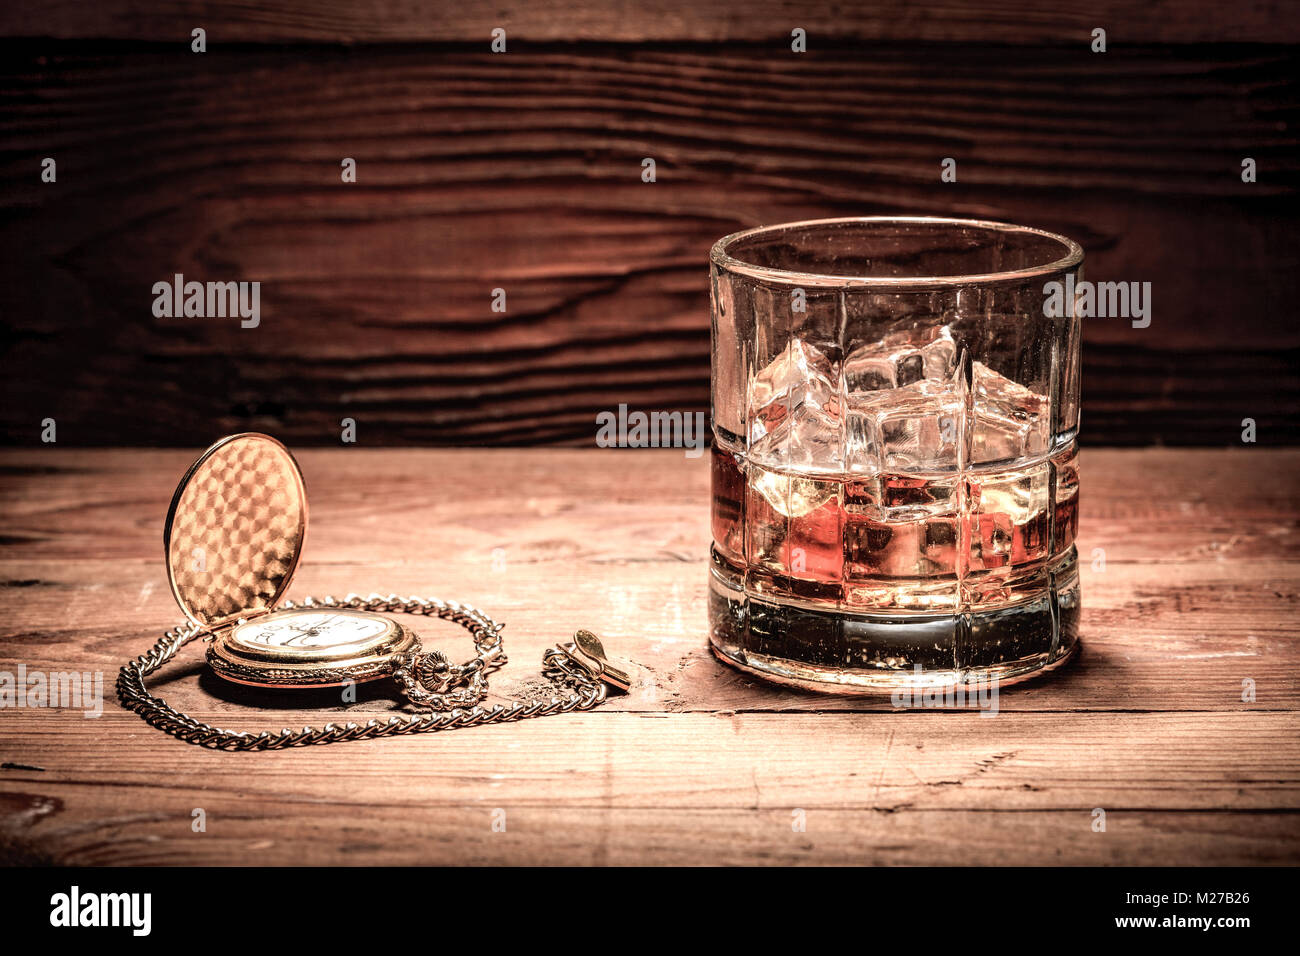 A retro style image of a glass of liquor with ice and a pocket watch on wood. Stock Photo